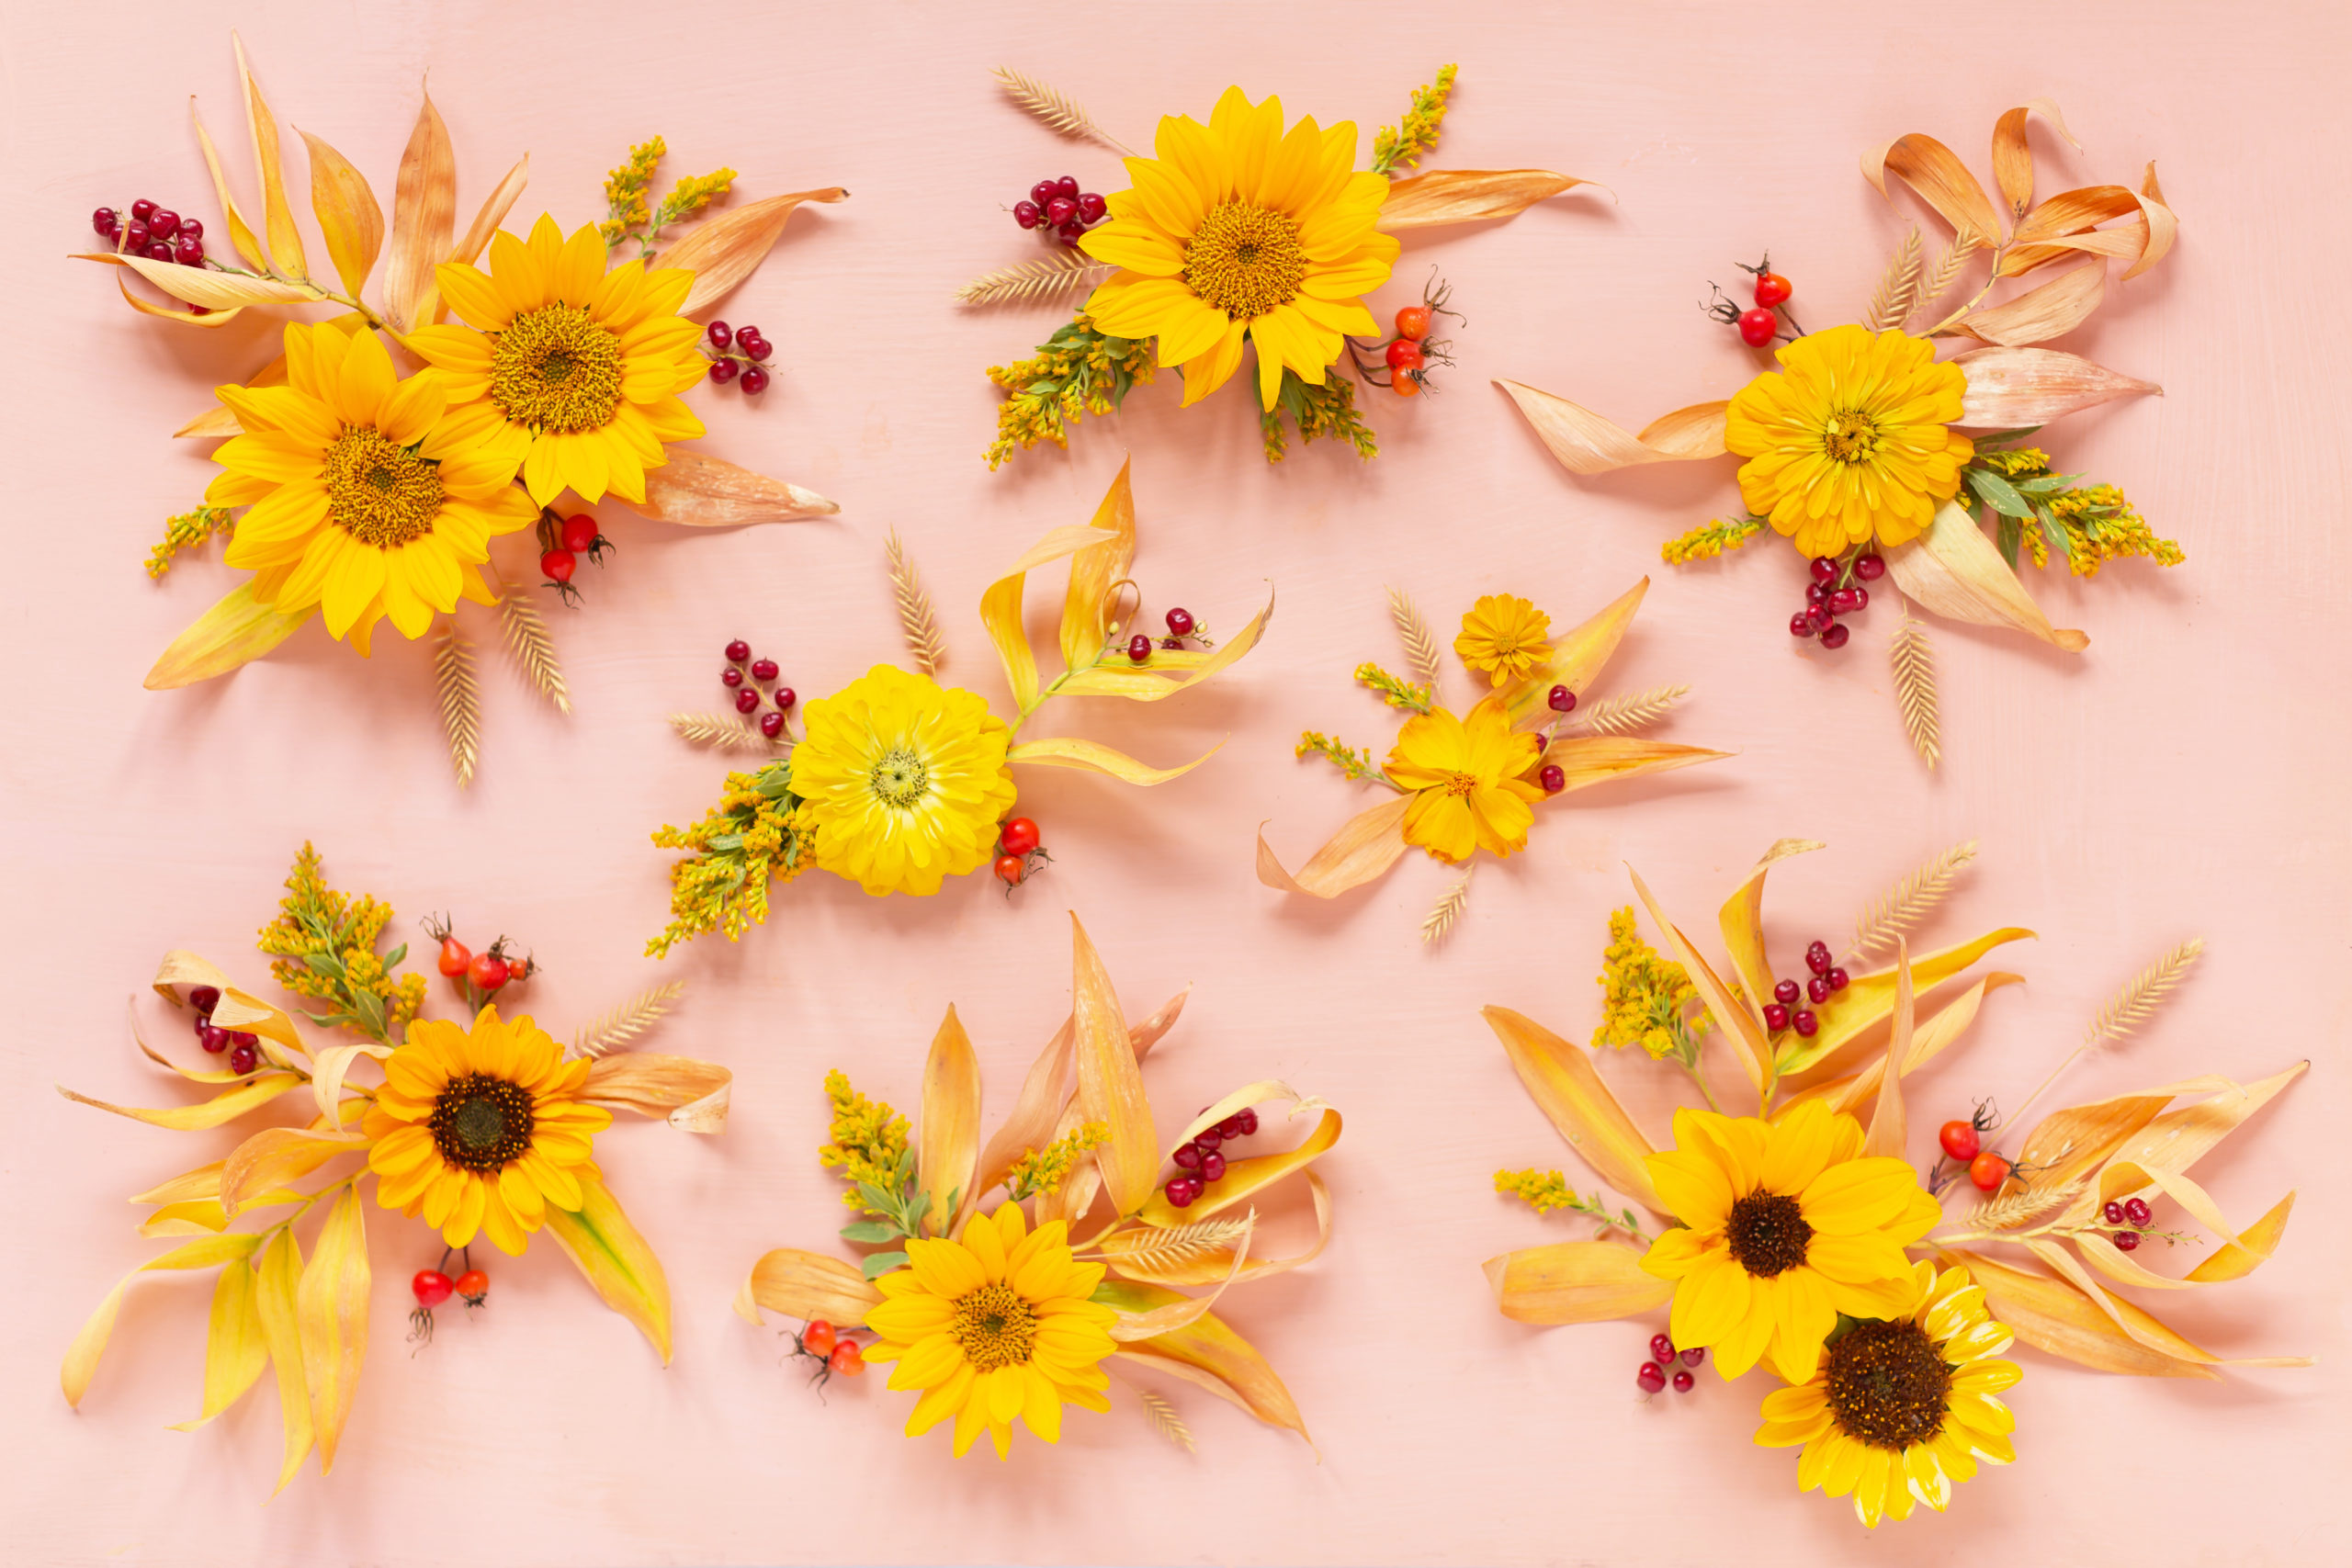 DIGITAL BLOOMS OCTOBER 2020 | FREE DESKTOP WALLPAPER | Free Fall / Autumn 2020 Floral Desktop Wallpapers featuring Alberta grown Sunflowers, Yellow Zinnias, Sulfur Cosmos, Goldenrod, Starry False Lily of the Valley, Rosehips and Crested Wheatgrass on an Pantone Autumn/Winter 2020/2021 Rose Tan background | Free Sunflower Floral Wallpapers for Fall | Boho Flower Fall 2020 Tech Wallpapers | The Best FREE Fall/Autumn Tech Wallpapers | Free Floral Tech Wallpapers Fall 2020 // JustineCelina.com